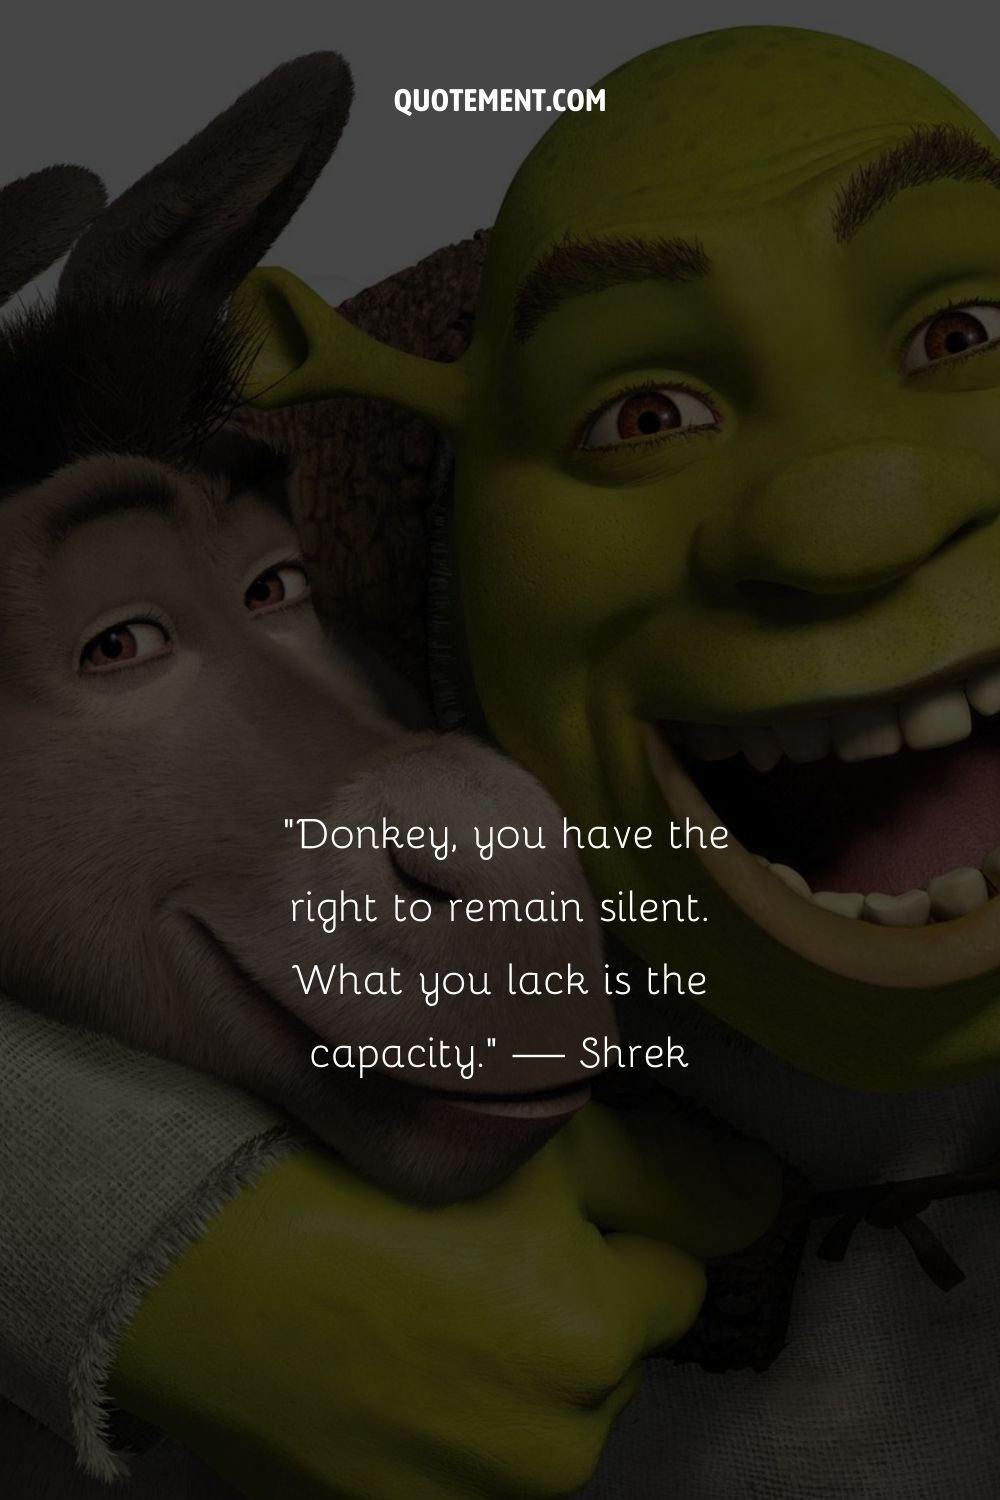 An image of Shrek and Donkey representing the best Shrek quote.
